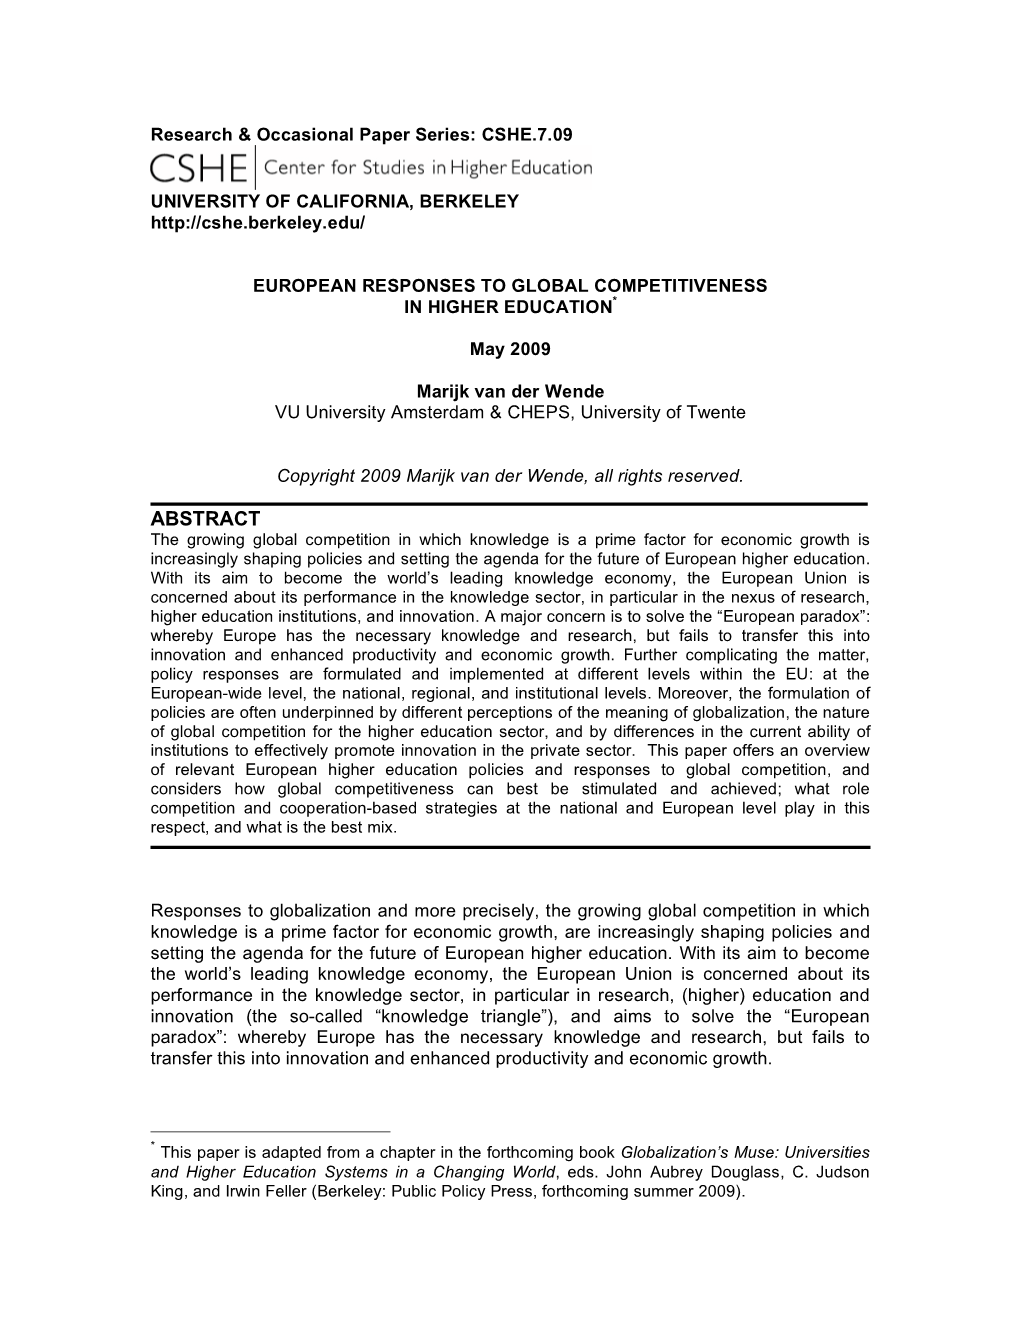 European Responses to Global Competitiveness in Higher Education. Research & Occasional Paper Series: CSHE. 7.09